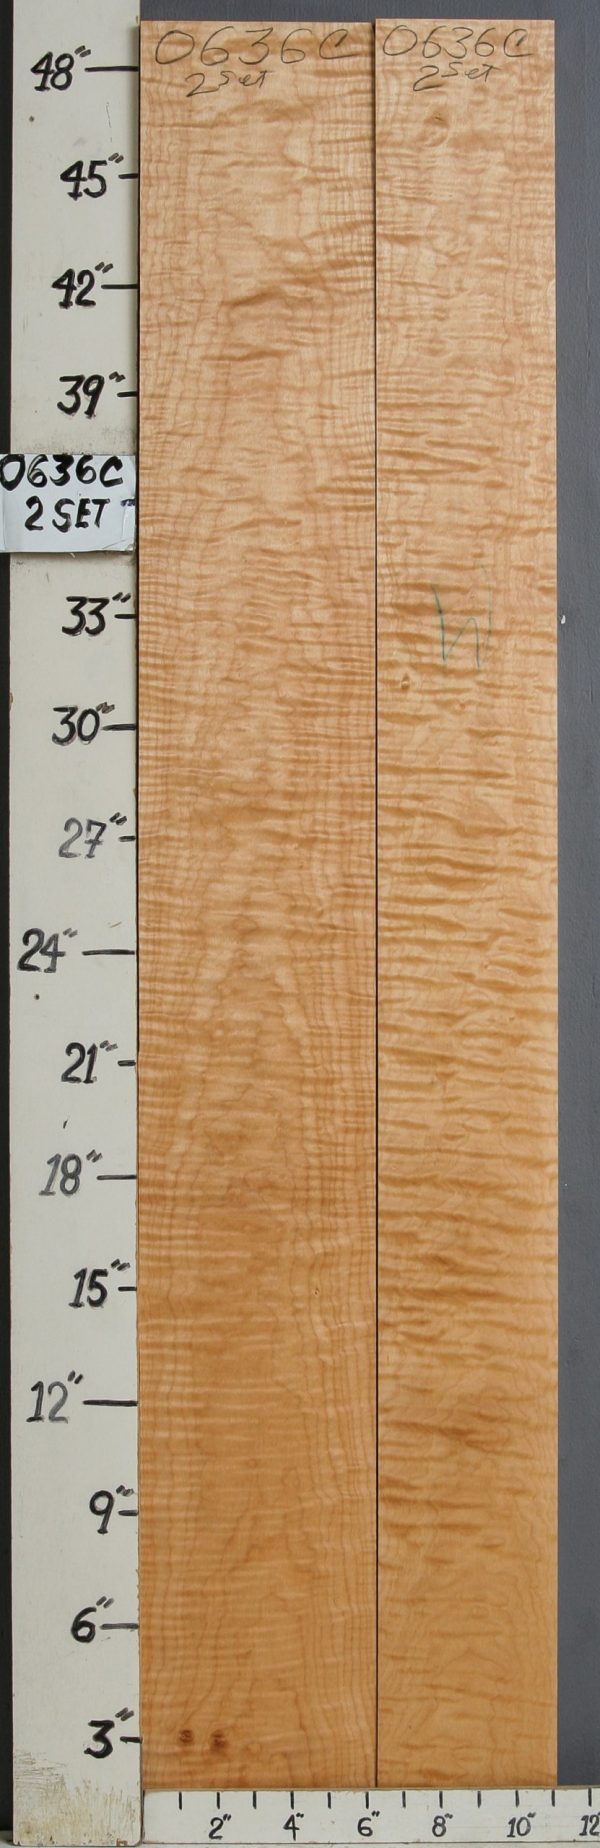 MUSICAL CURLY MAPLE LUMBER 11"1/8 X 49" X 4/4 (NWT-0636C)